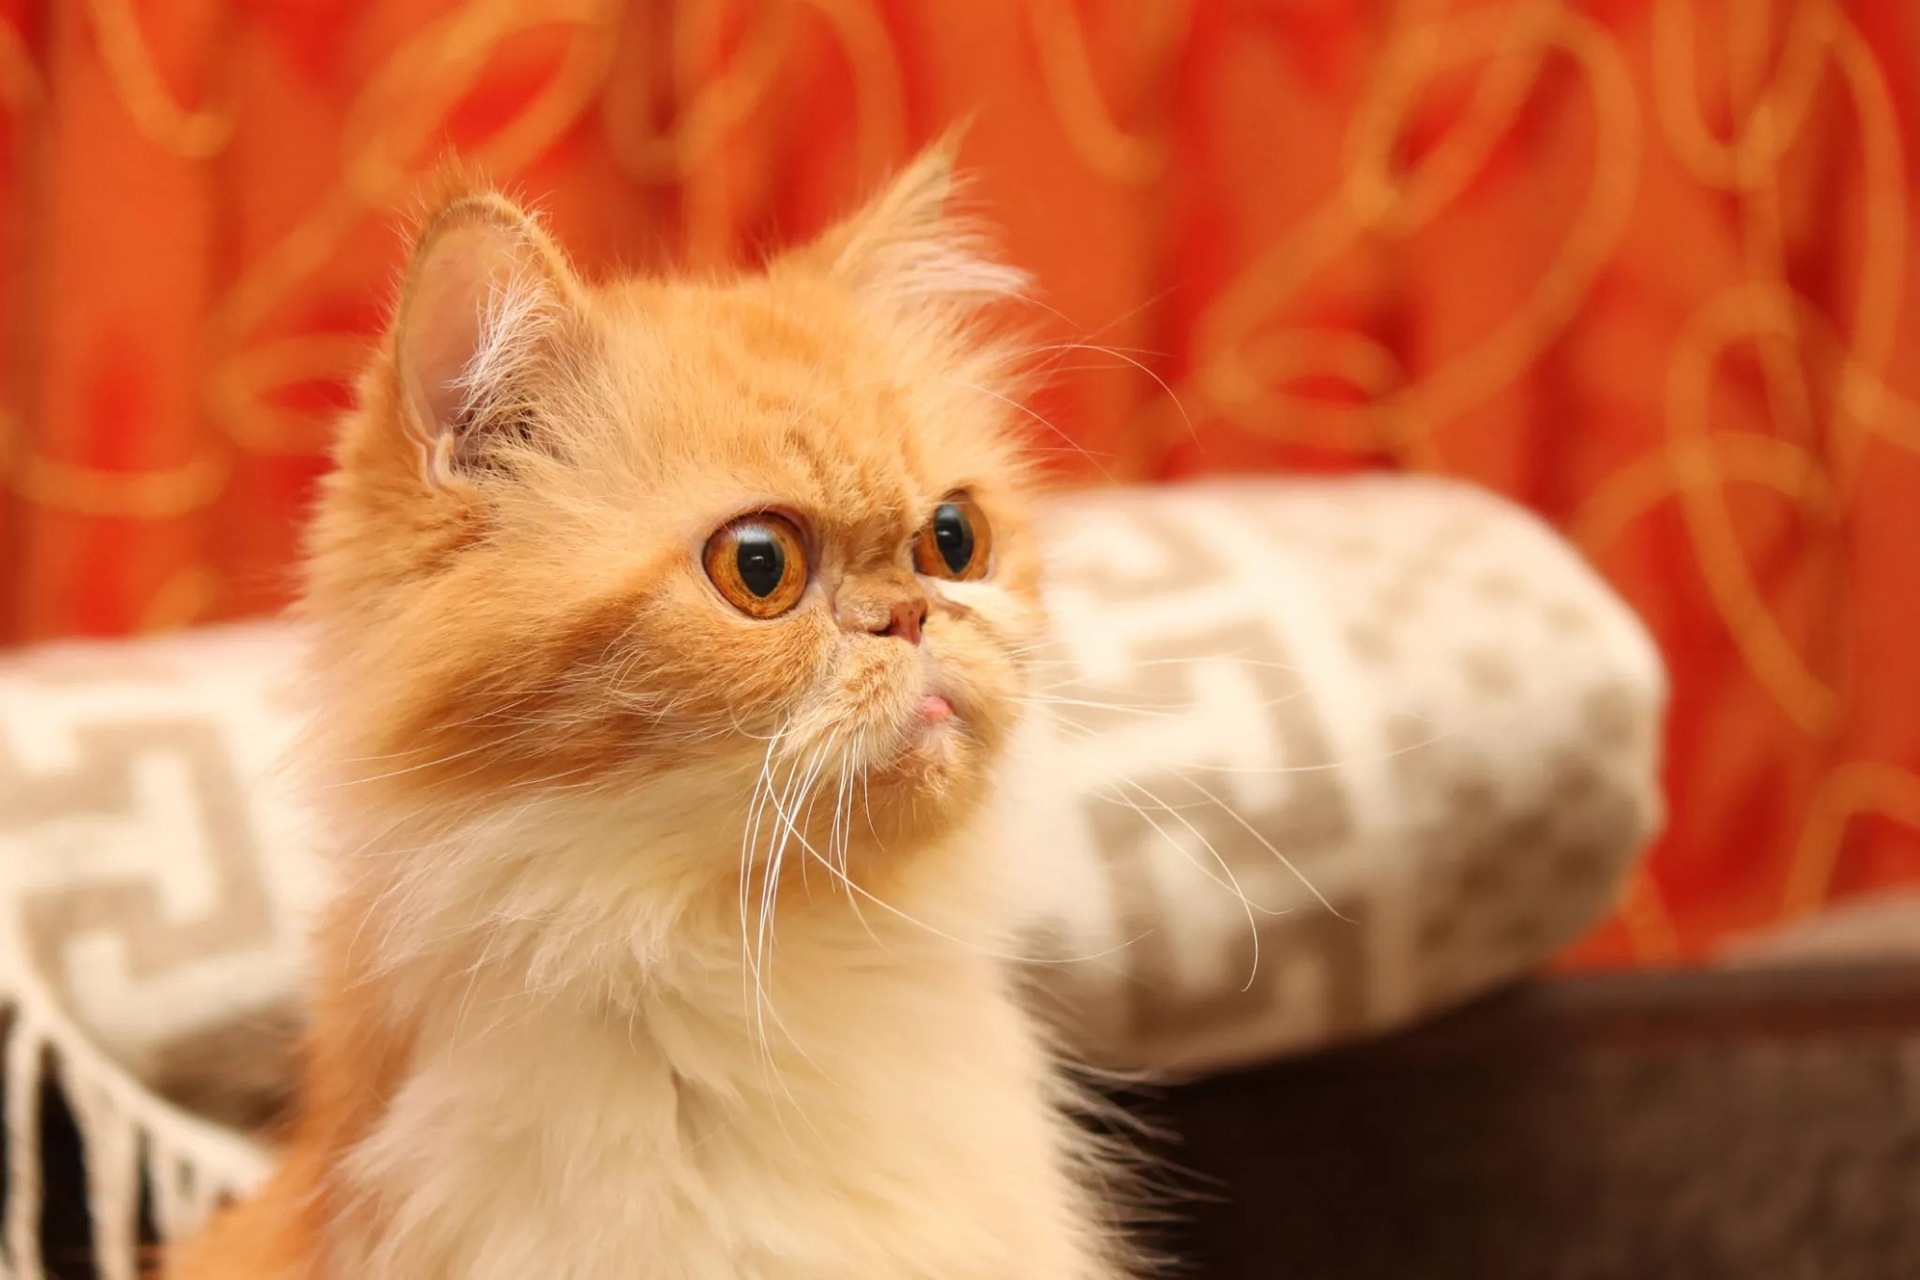 The Cat’s Mind: 14 Ridiculous Thoughts Your Cat Has Each Day